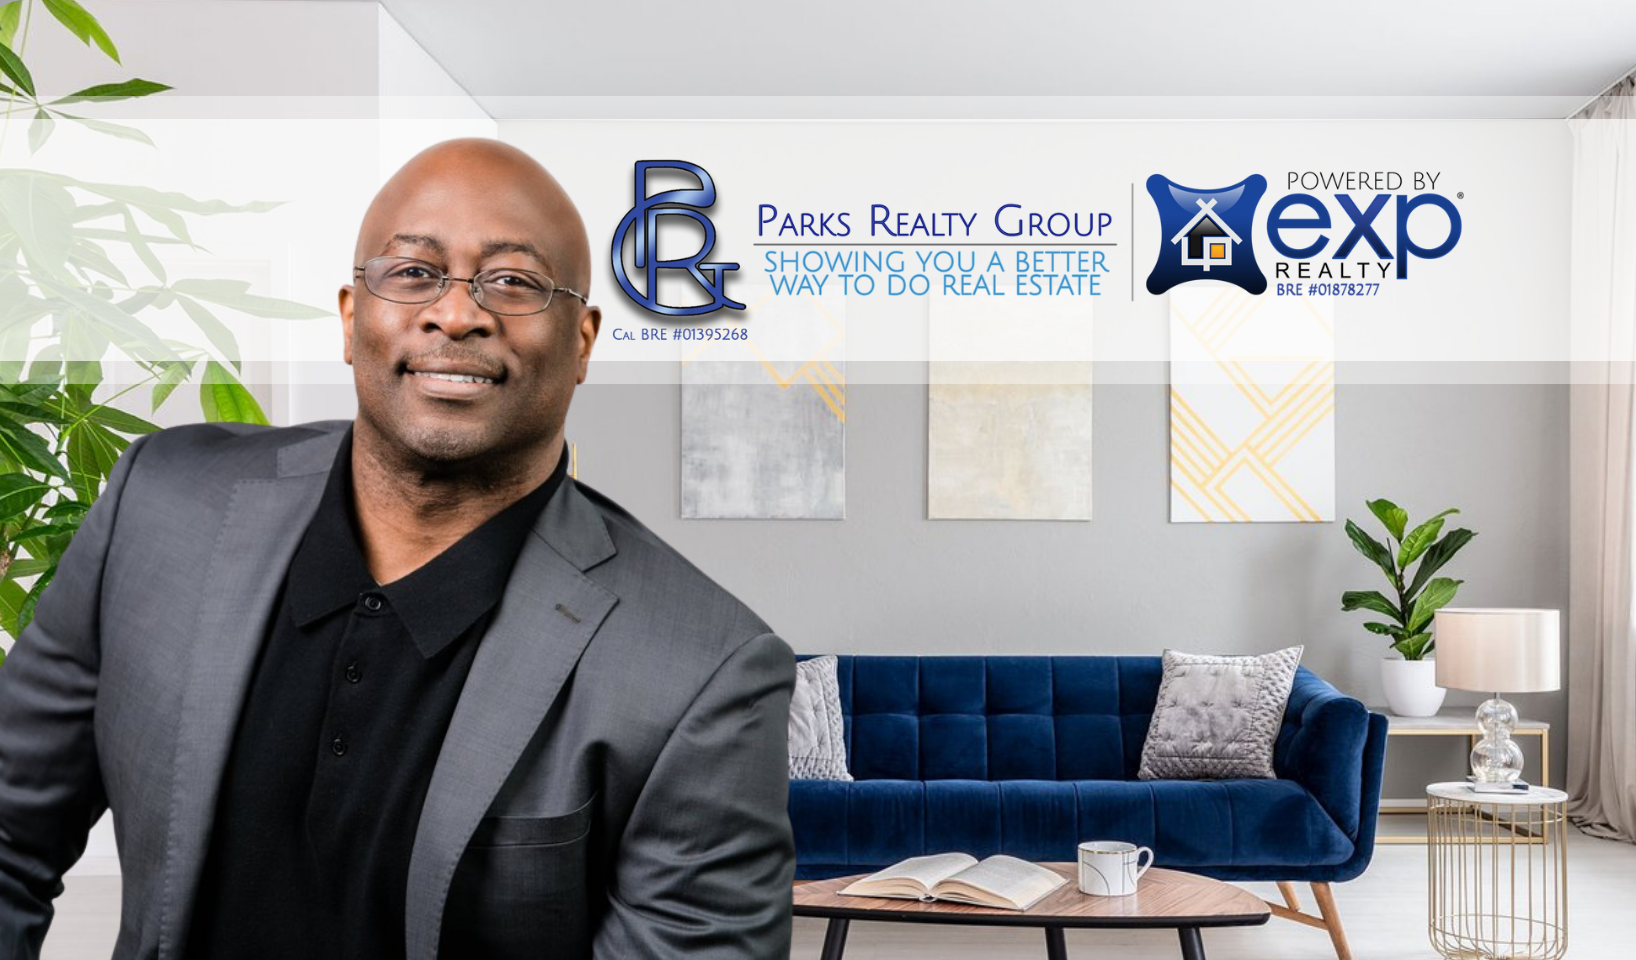 Parks Realty Group